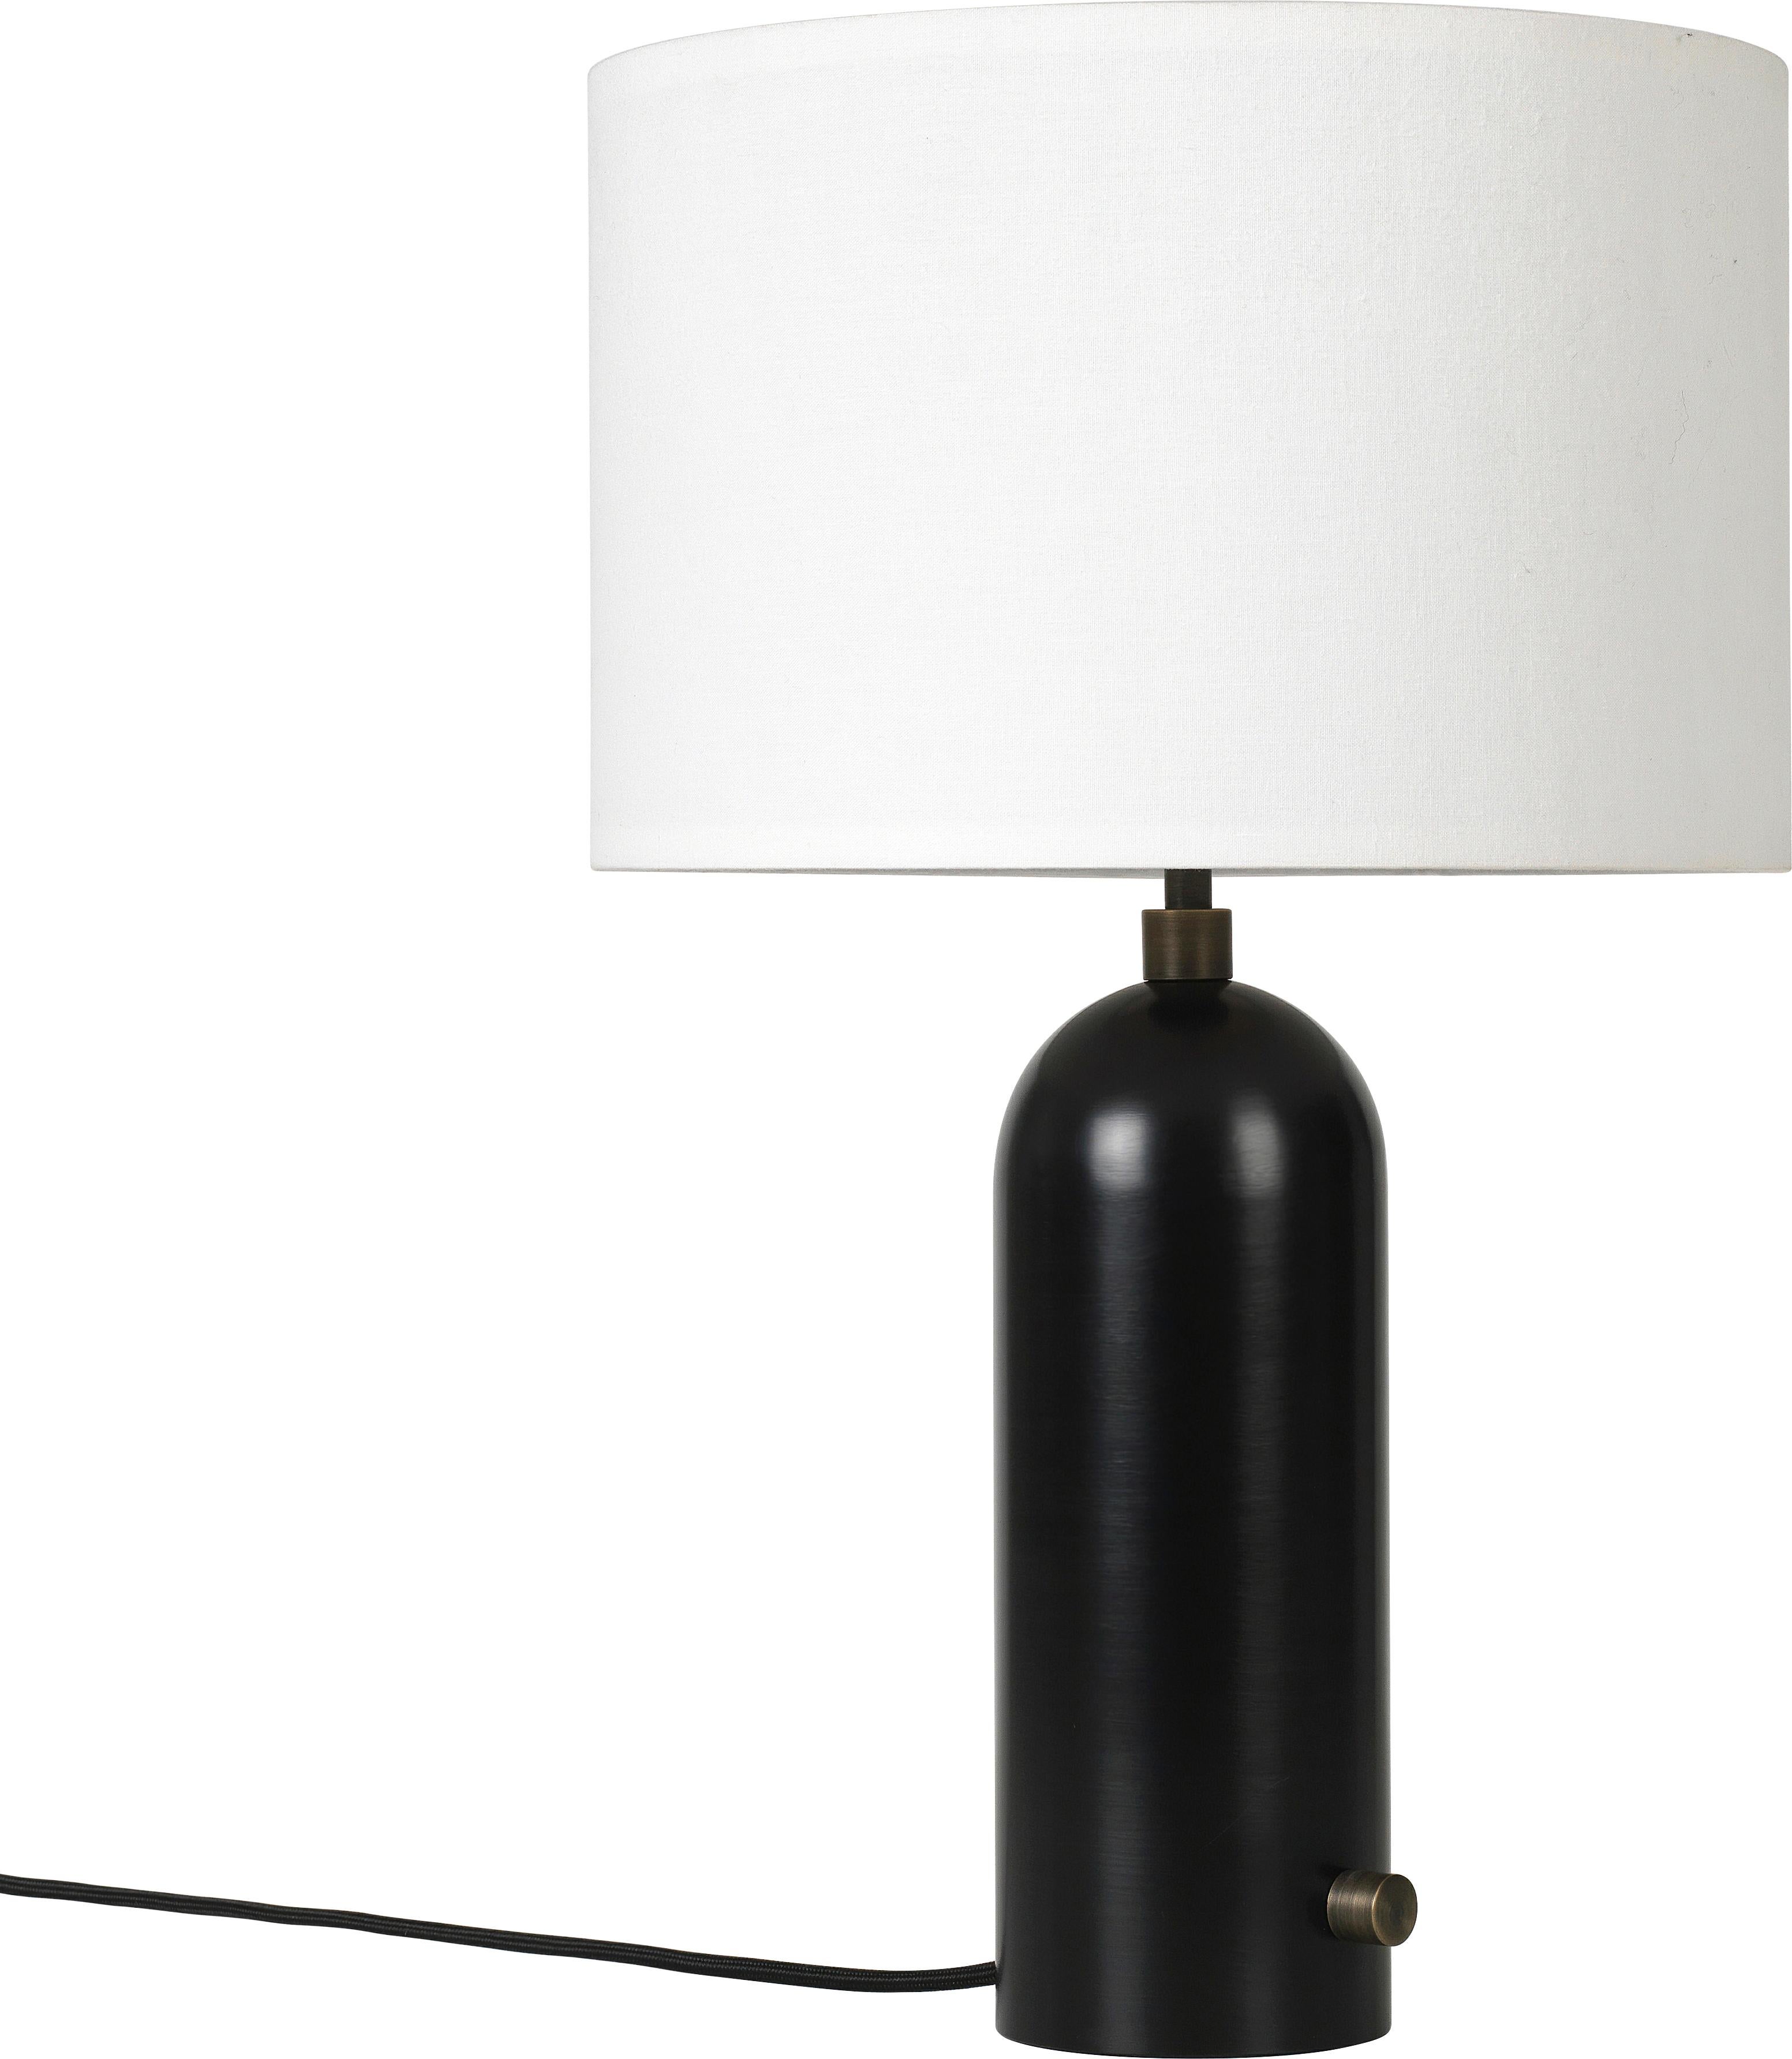 Large 'Gravity' Marble Table Lamp by Space Copenhagen for Gubi in Black For Sale 11